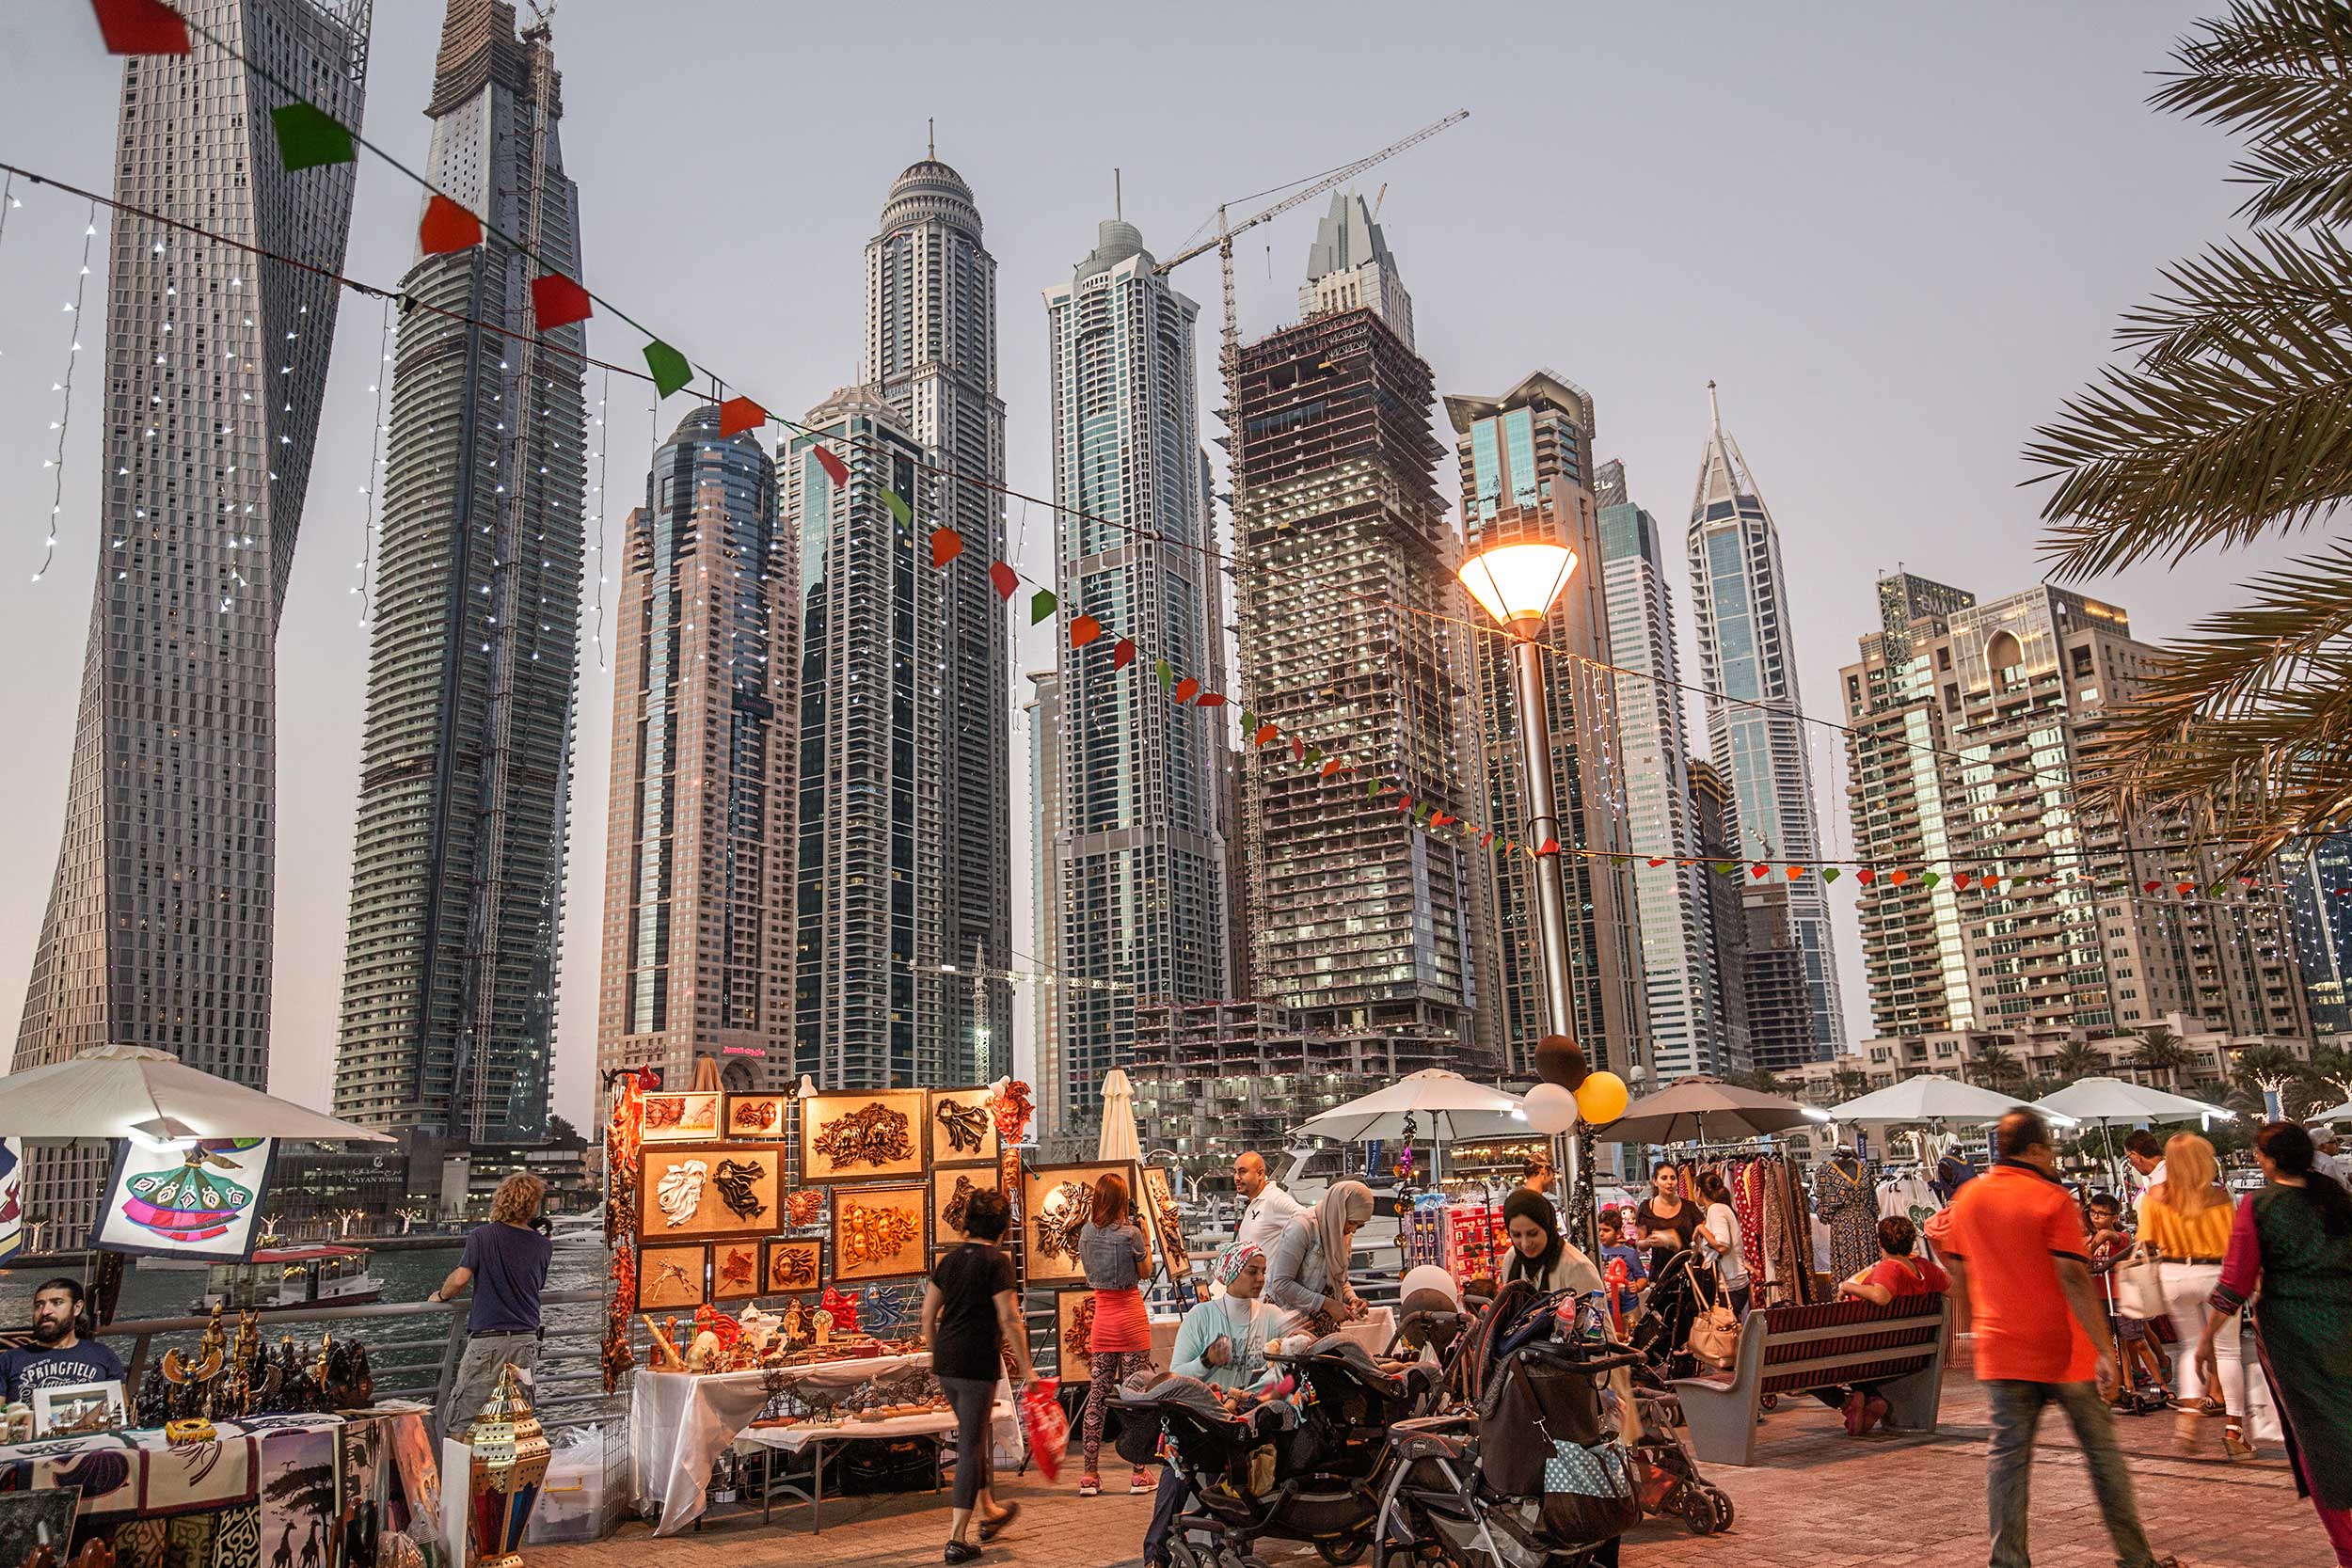 The lighted up stalls and vendors in the evening with people walking past them and the skyscrapers of Dubai in the background